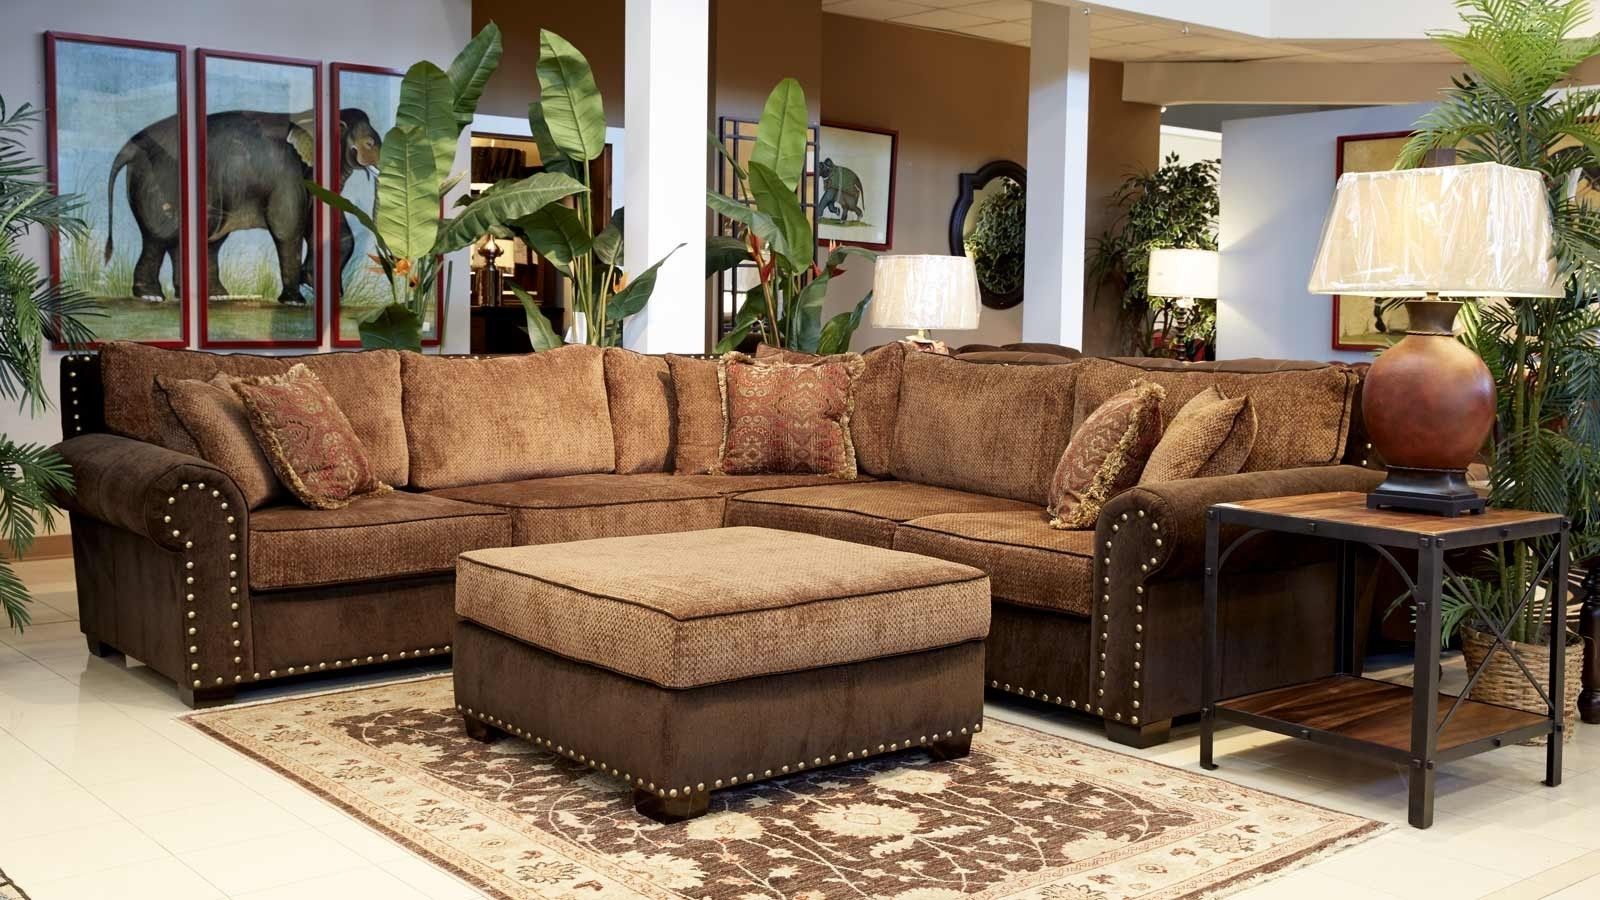 Barcelona Living Room Collection | Gallery Furniture With Gallery Furniture Sectional Sofas (View 9 of 10)